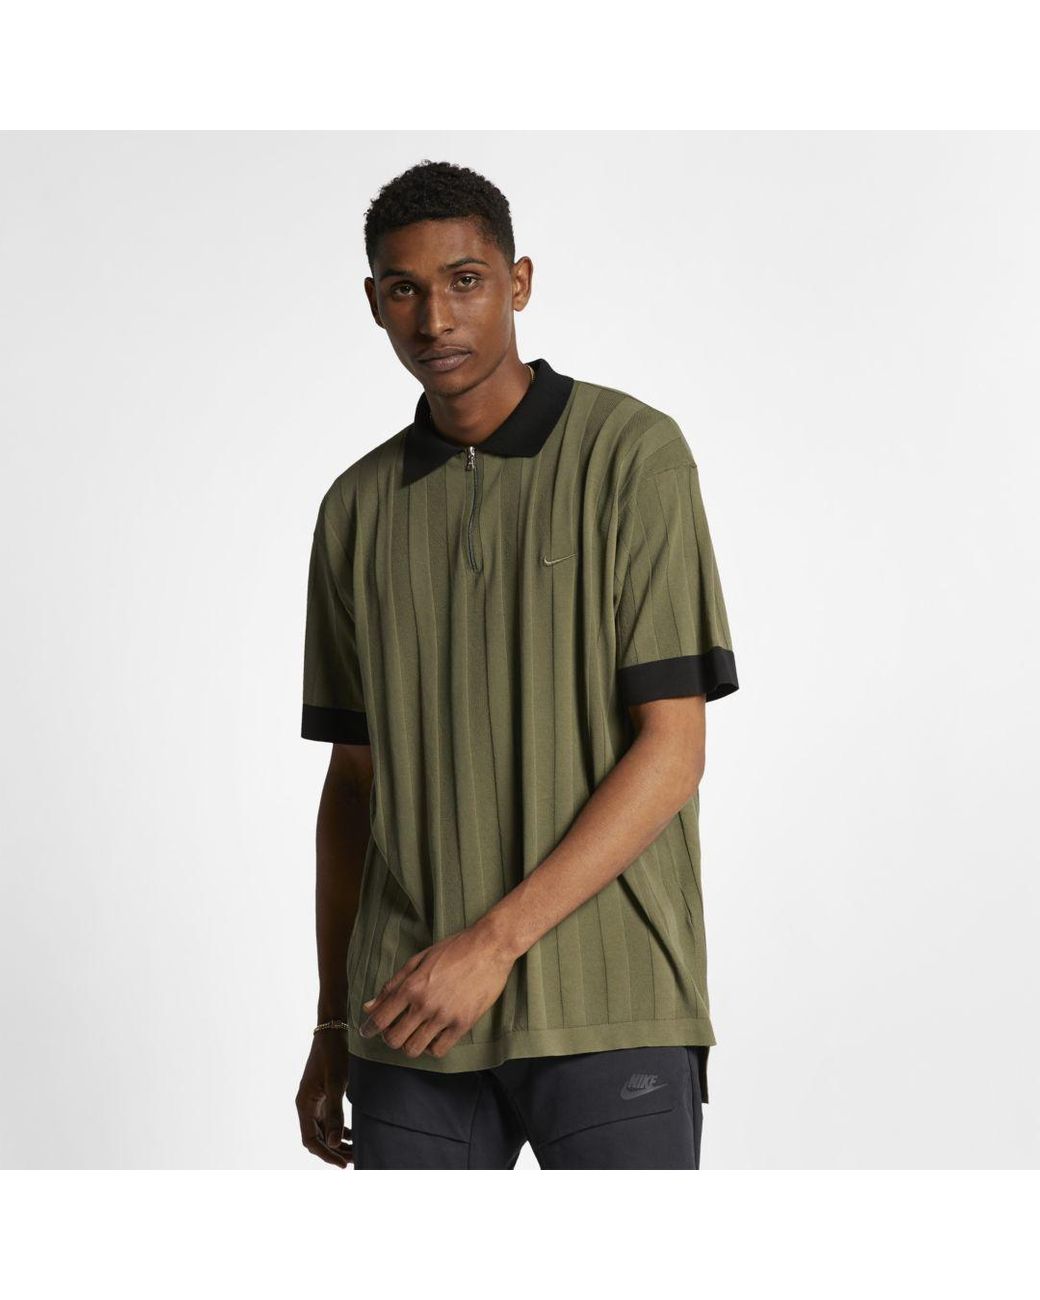 Nike Lab Made In Italy Collection Mens Knit Polo in Green for Men | Lyst